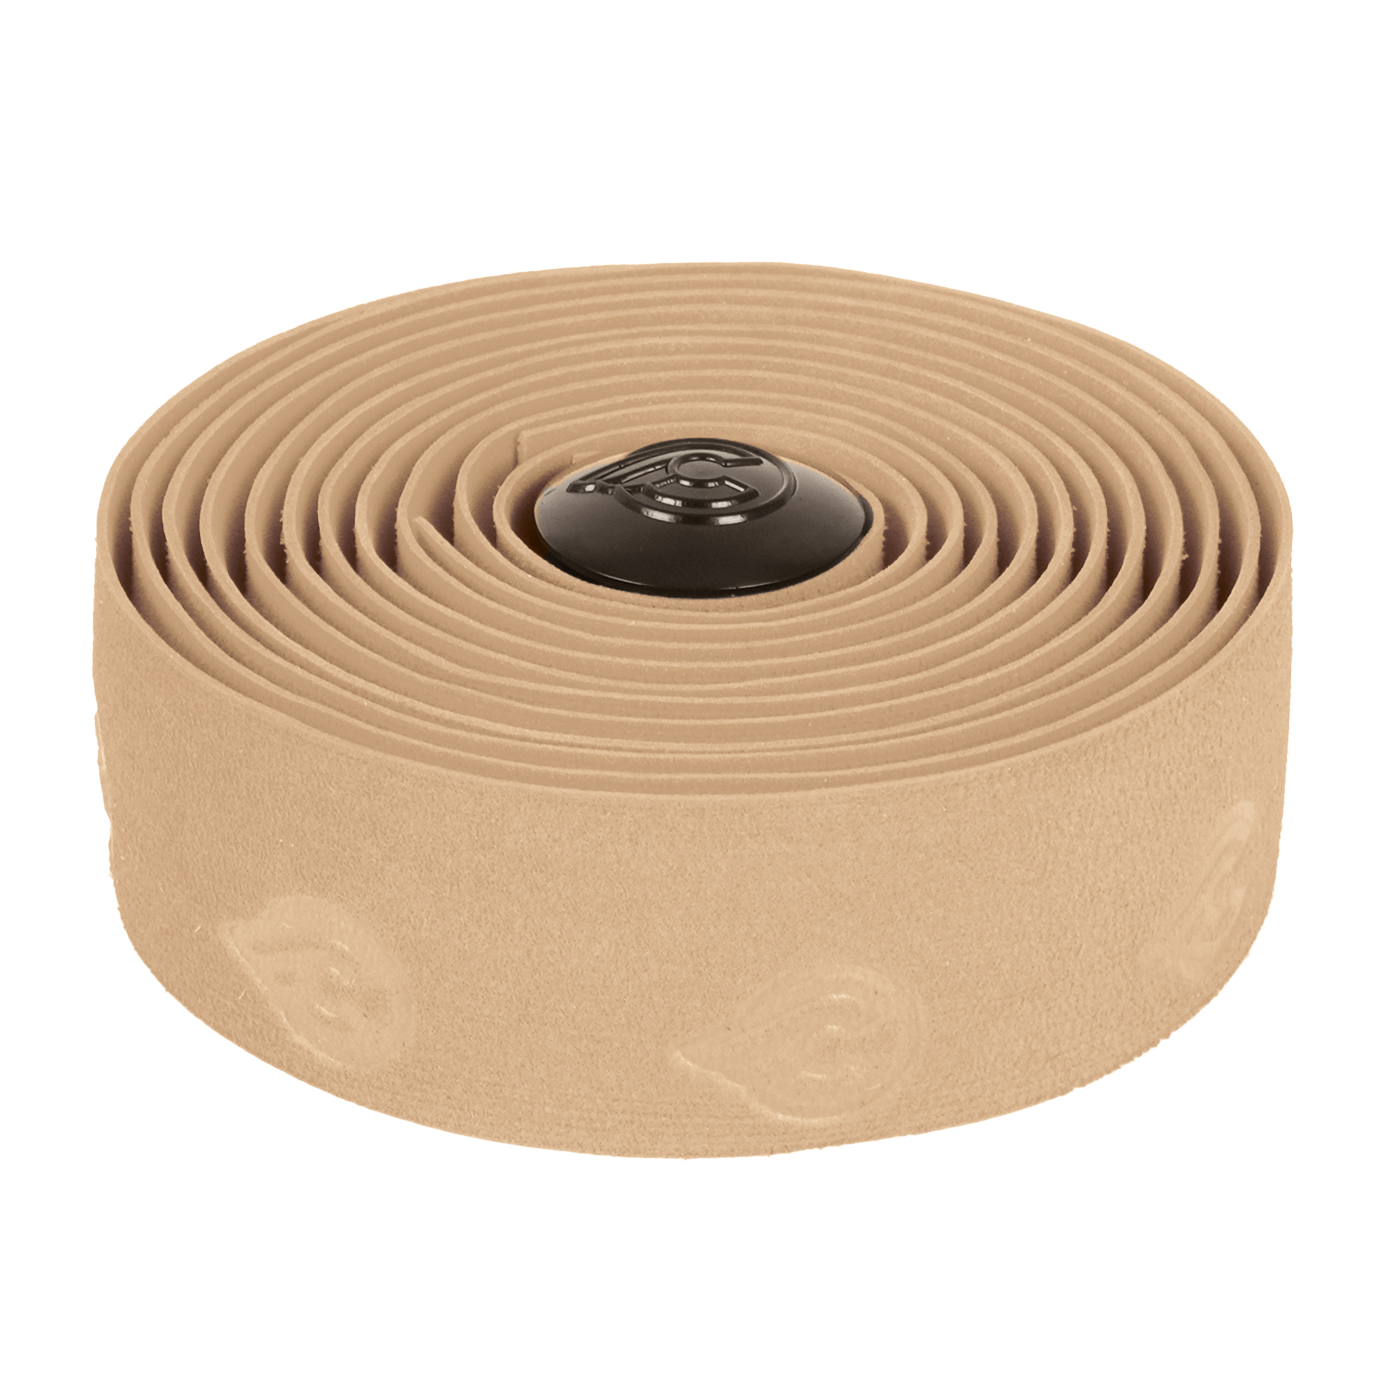 Picture of Cinelli Wave - Handlebar Tape - natural